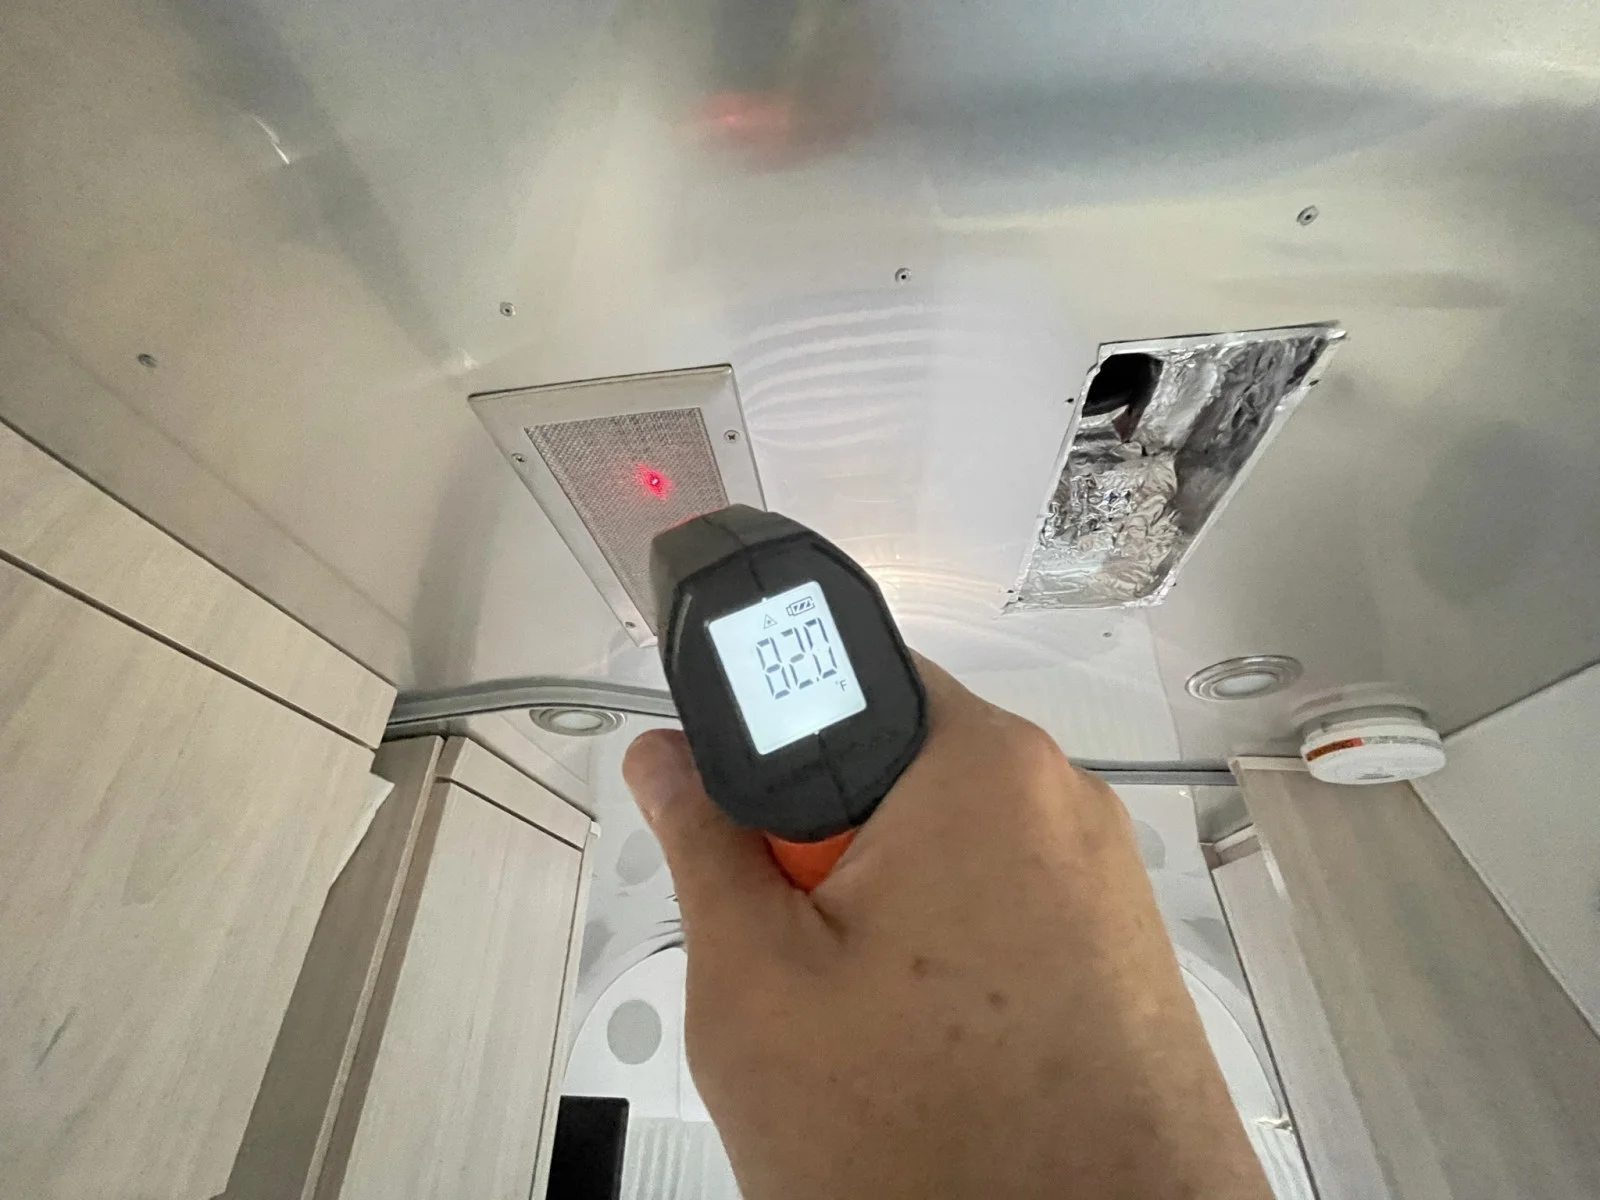 Testing after the modifications of our Airstream ducted air conditioning system - intake air temperature of 82 I was impressed with the cooling performance of the AC system after the modifications. Here the intake air temp is 82 ℉ with a outdoor temp of 82. ℉.